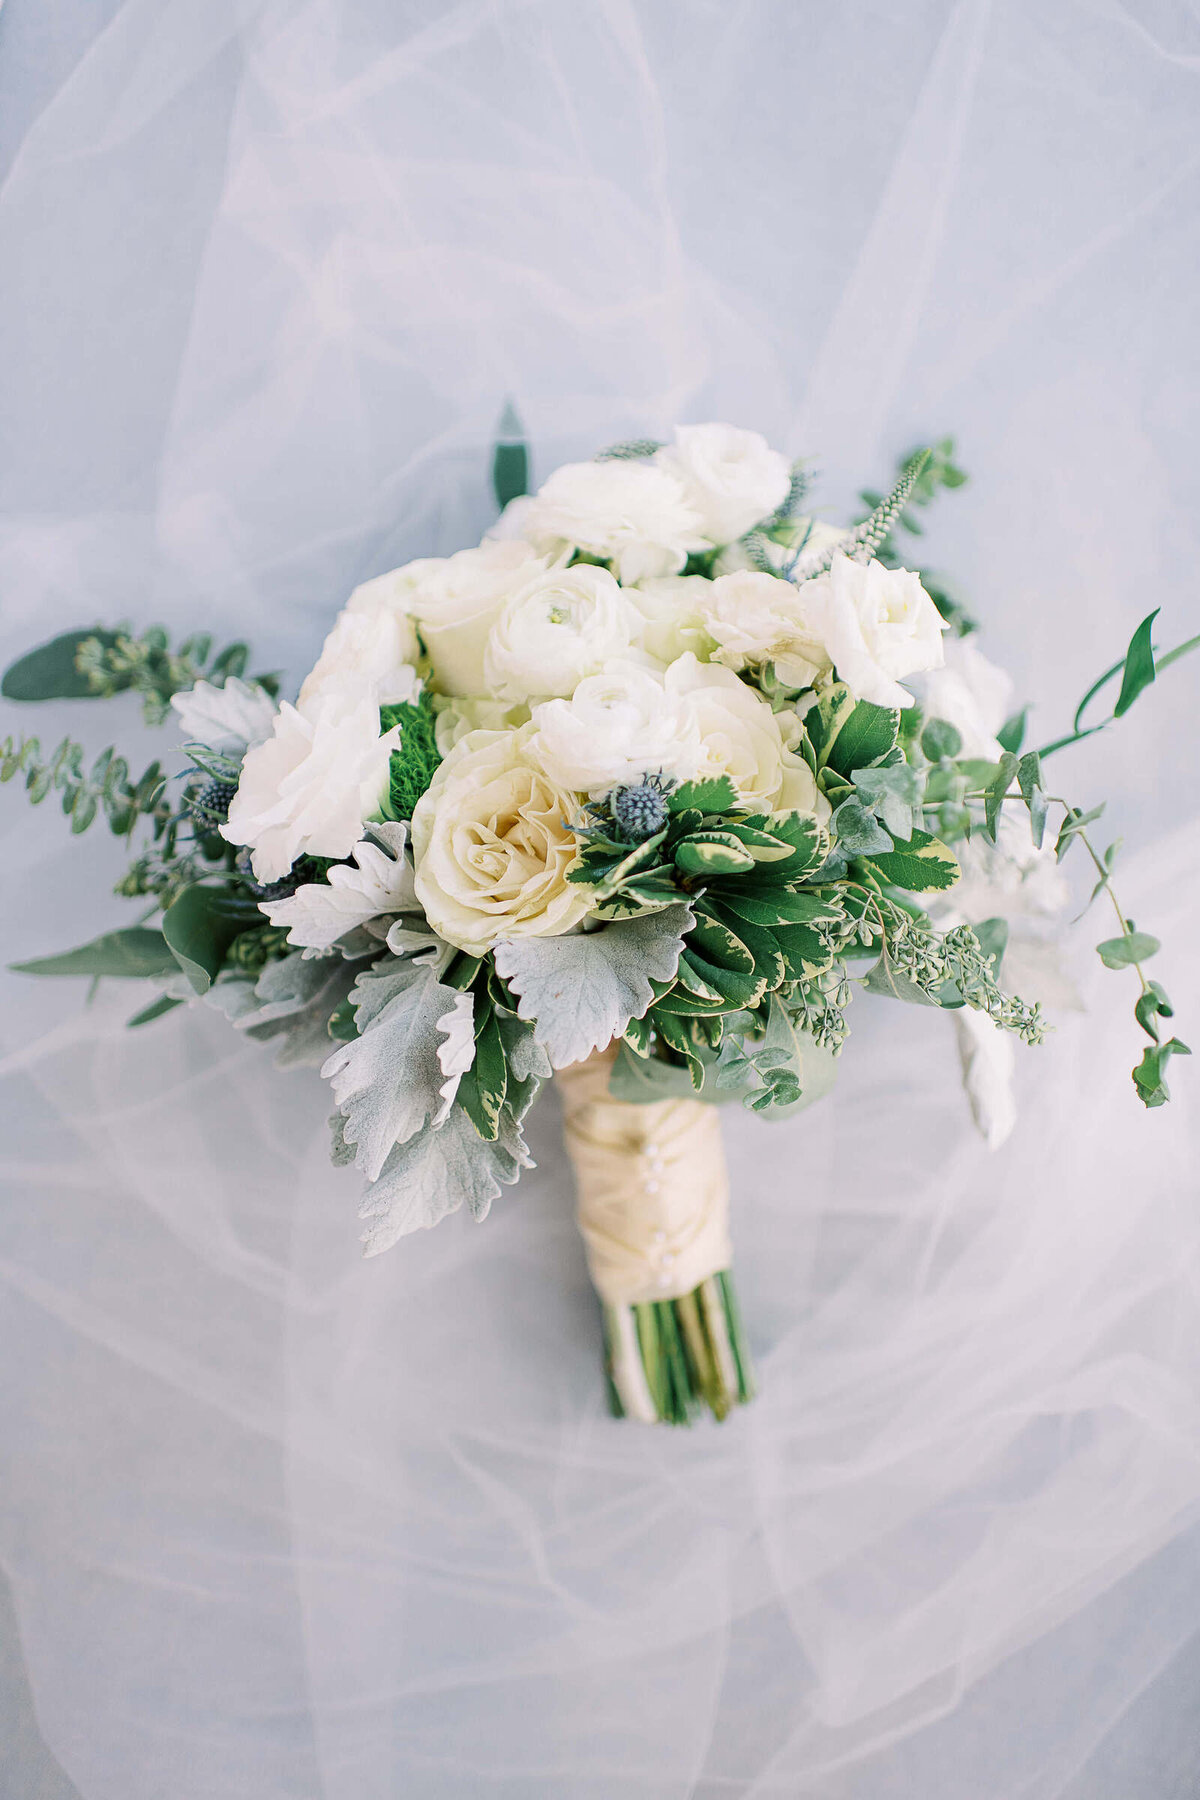 Elegant white rose bouquet for wedding in Texas hill country